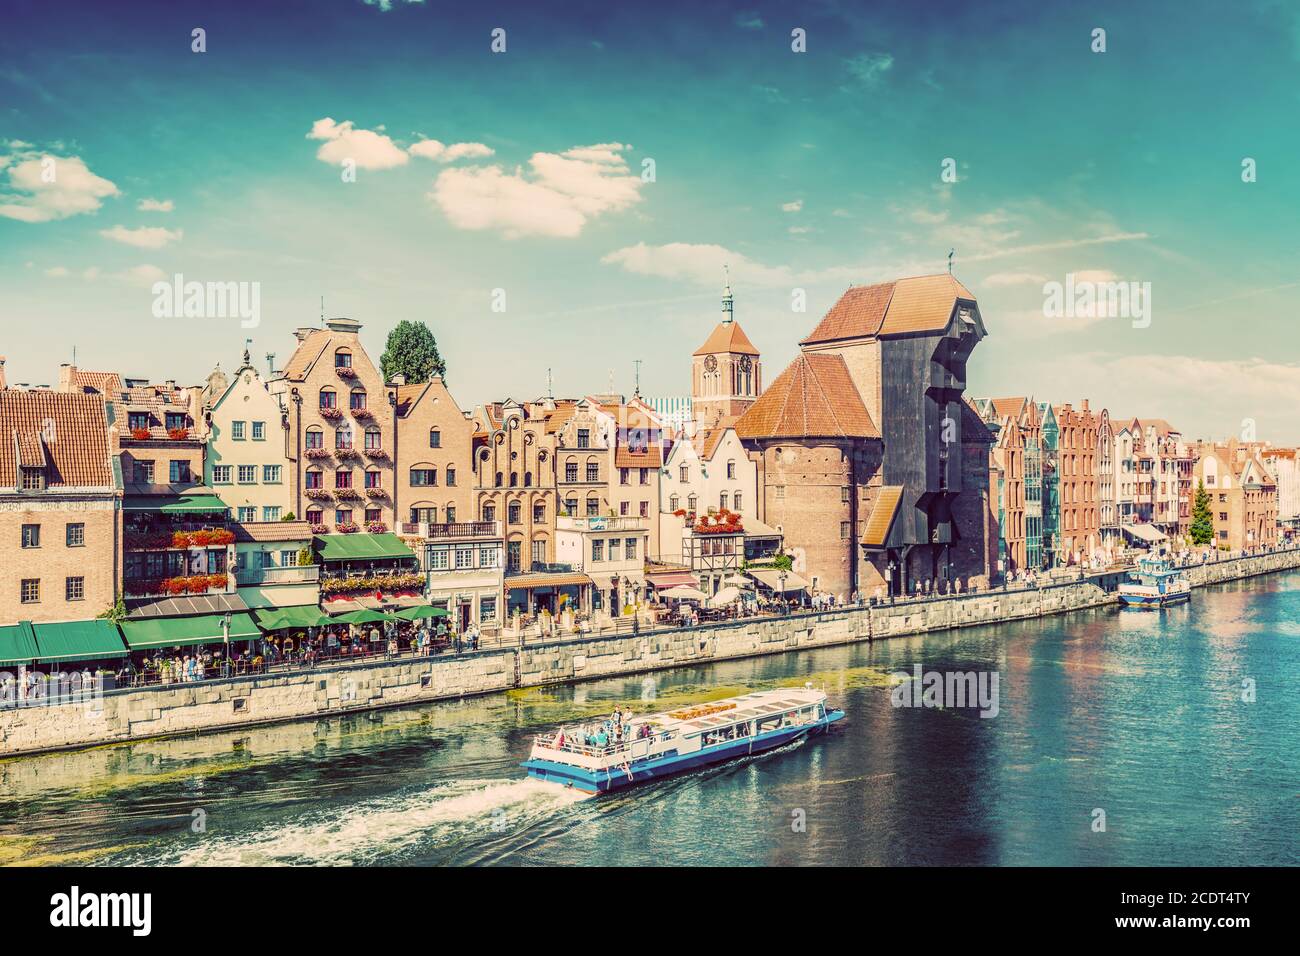 Gdansk old town and famous crane, Polish Zuraw. Motlawa river in Poland. Vintage Stock Photo